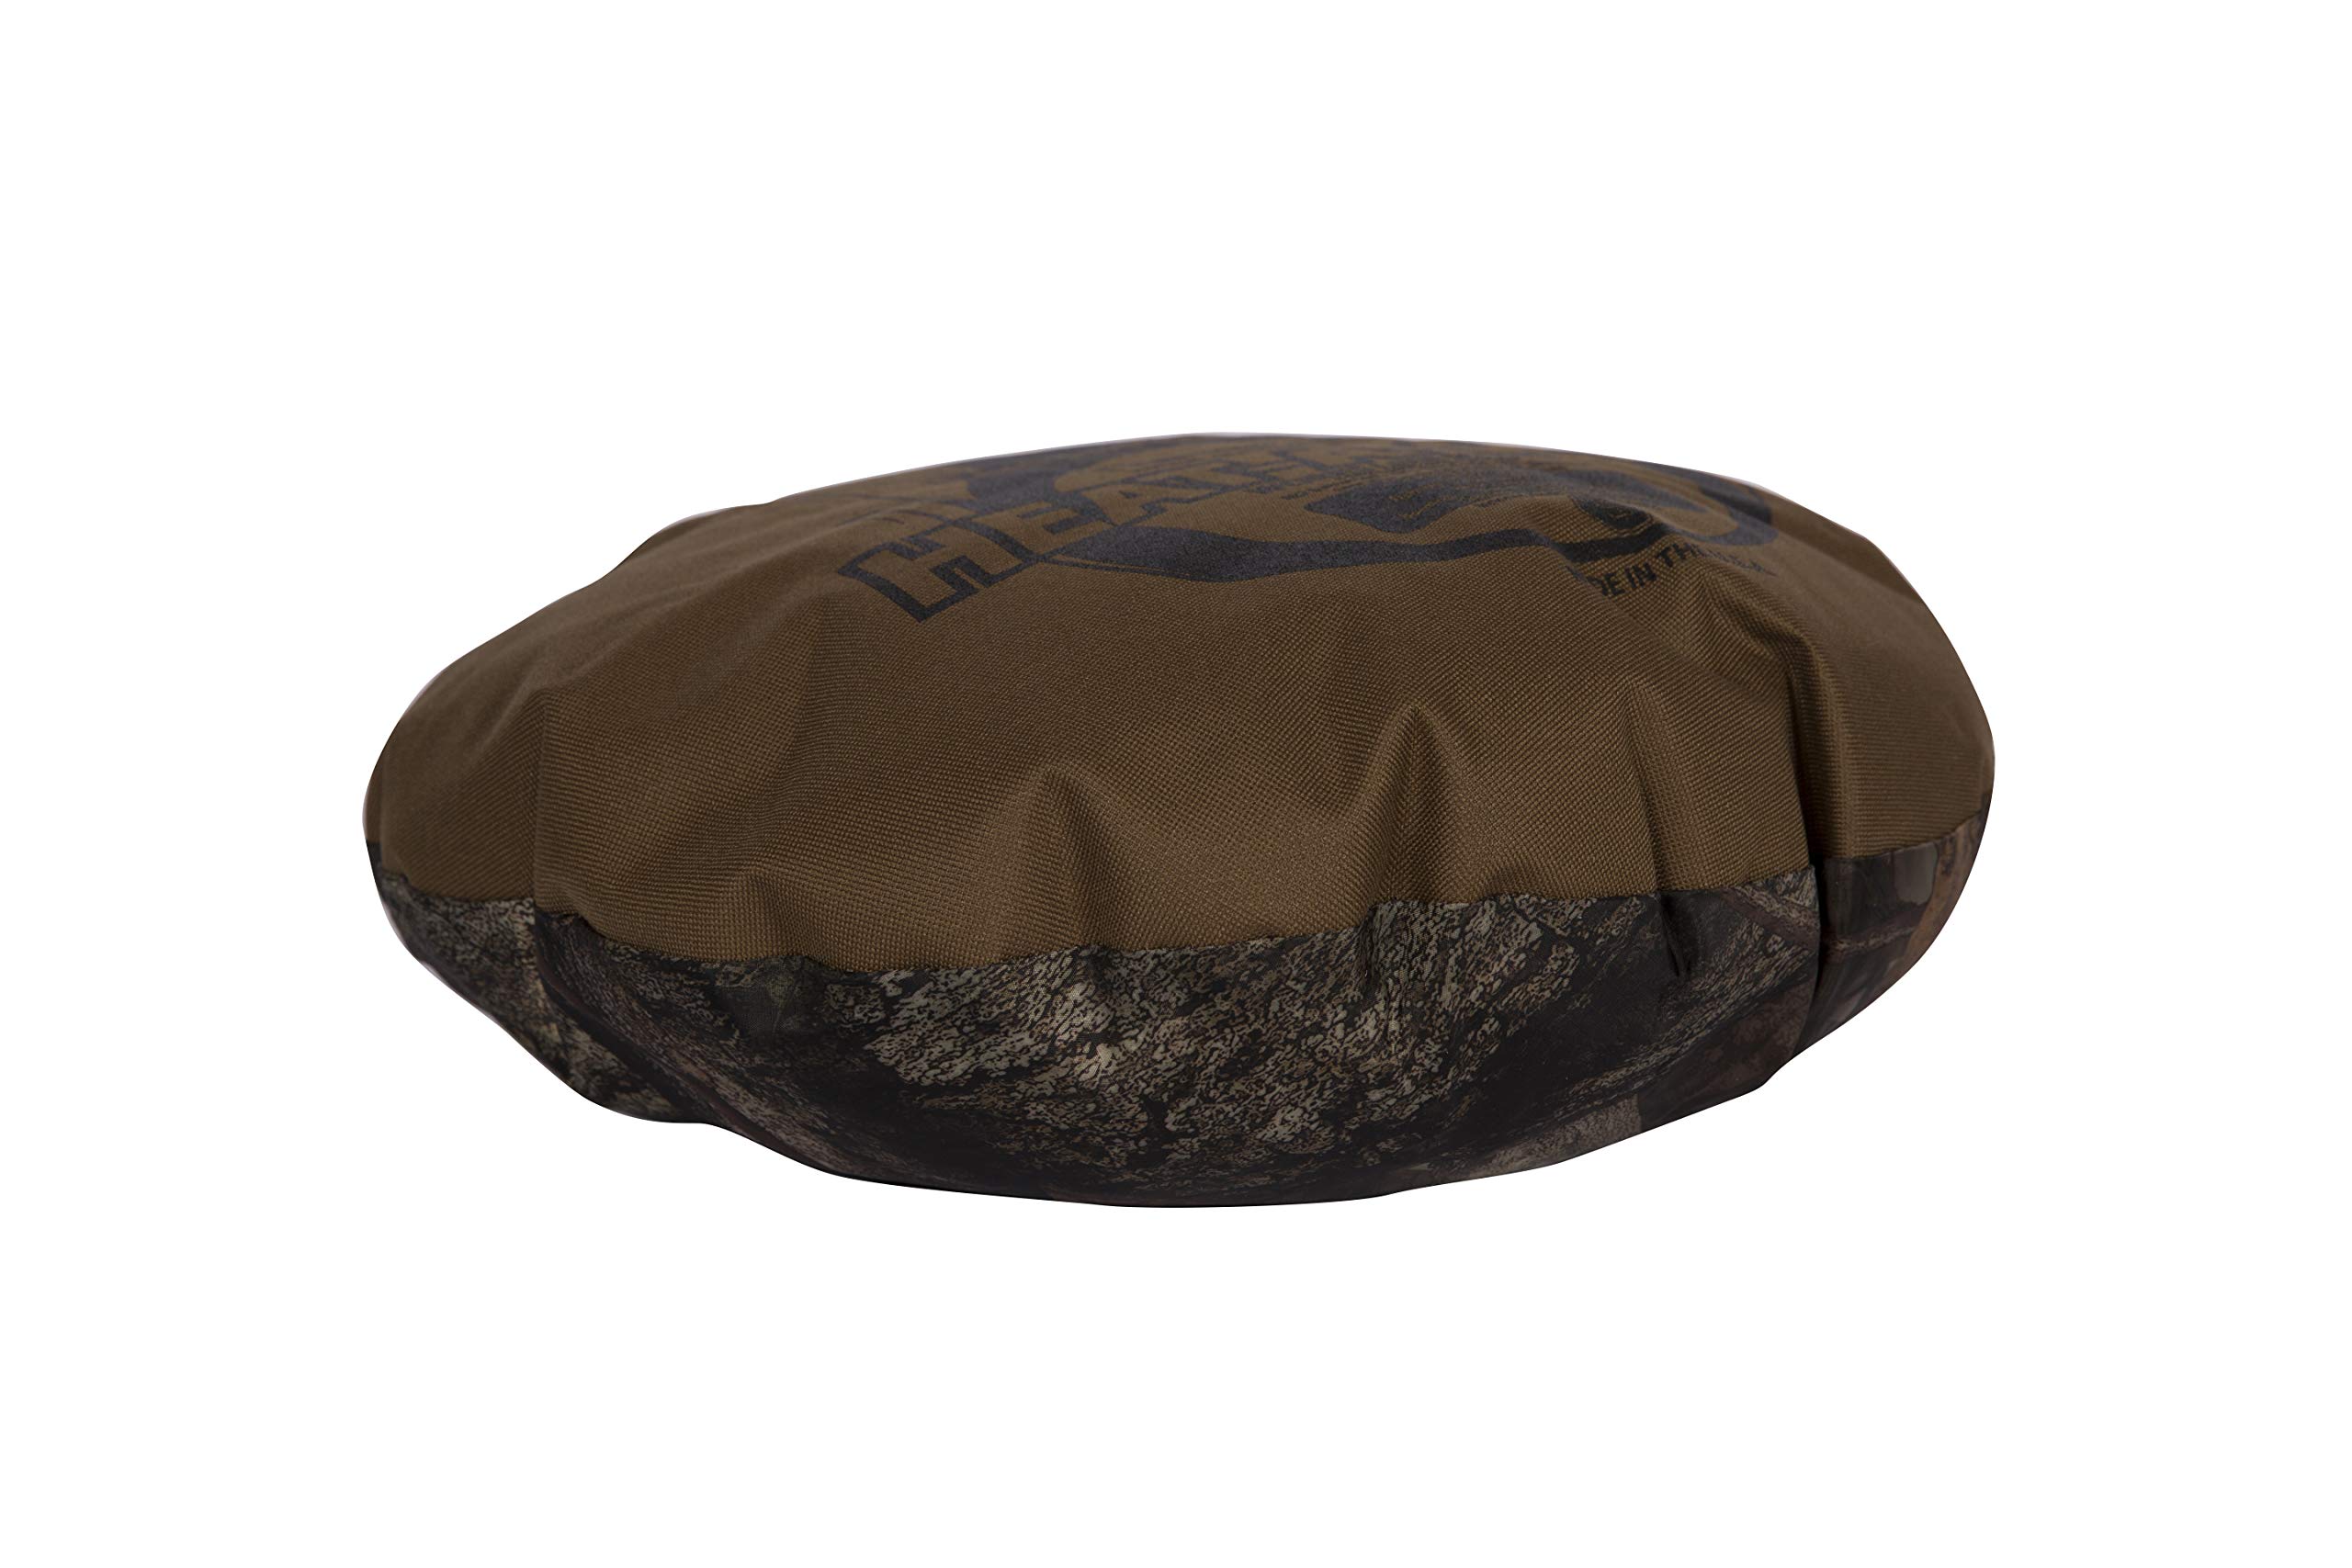 Northeast Products Therm-A-SEAT Heat-a-Seat Insulated Hunting Seat Cushion/Pillow